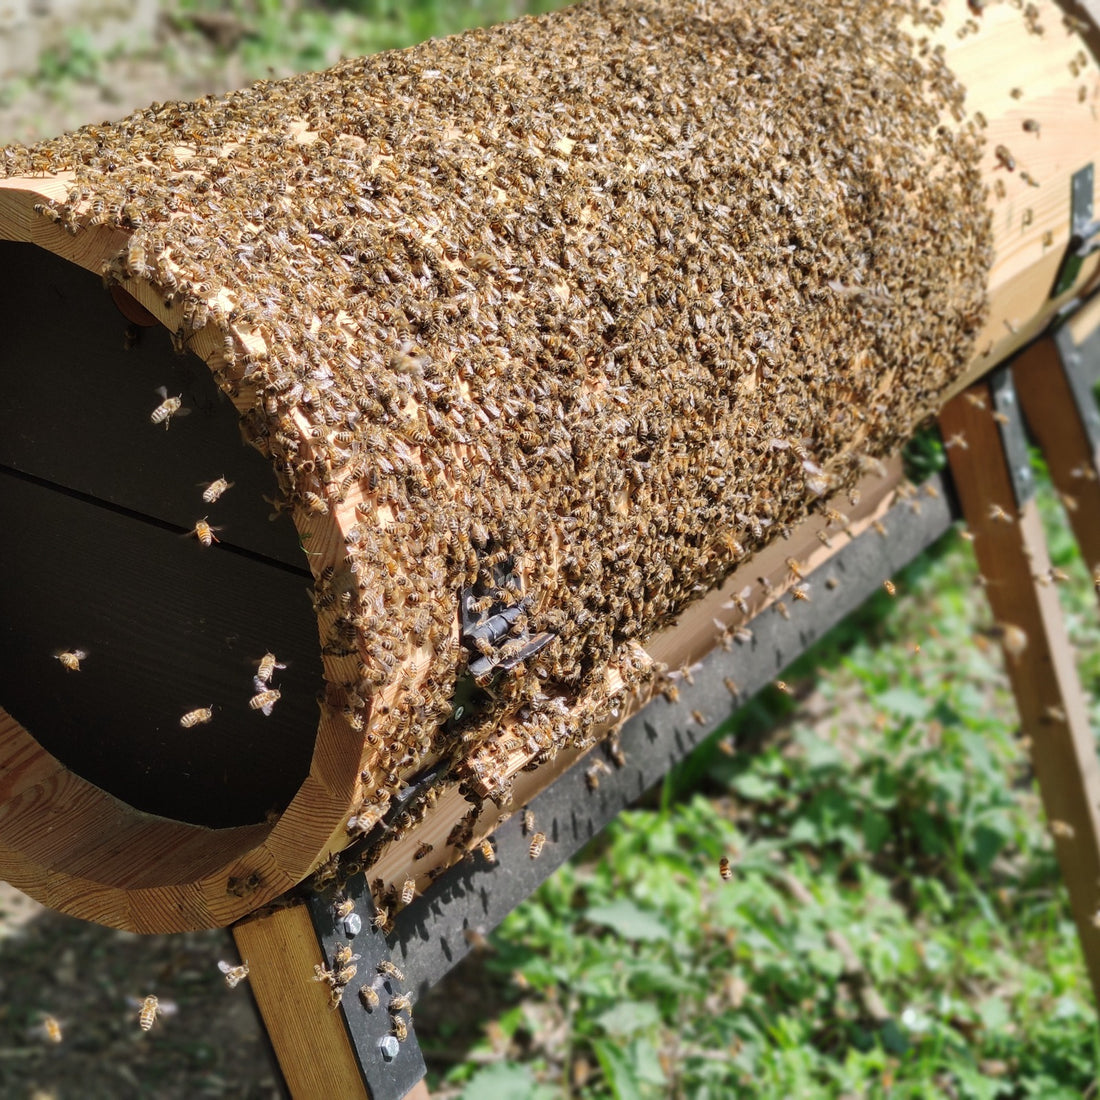 The Joys of Watching Bees in Action